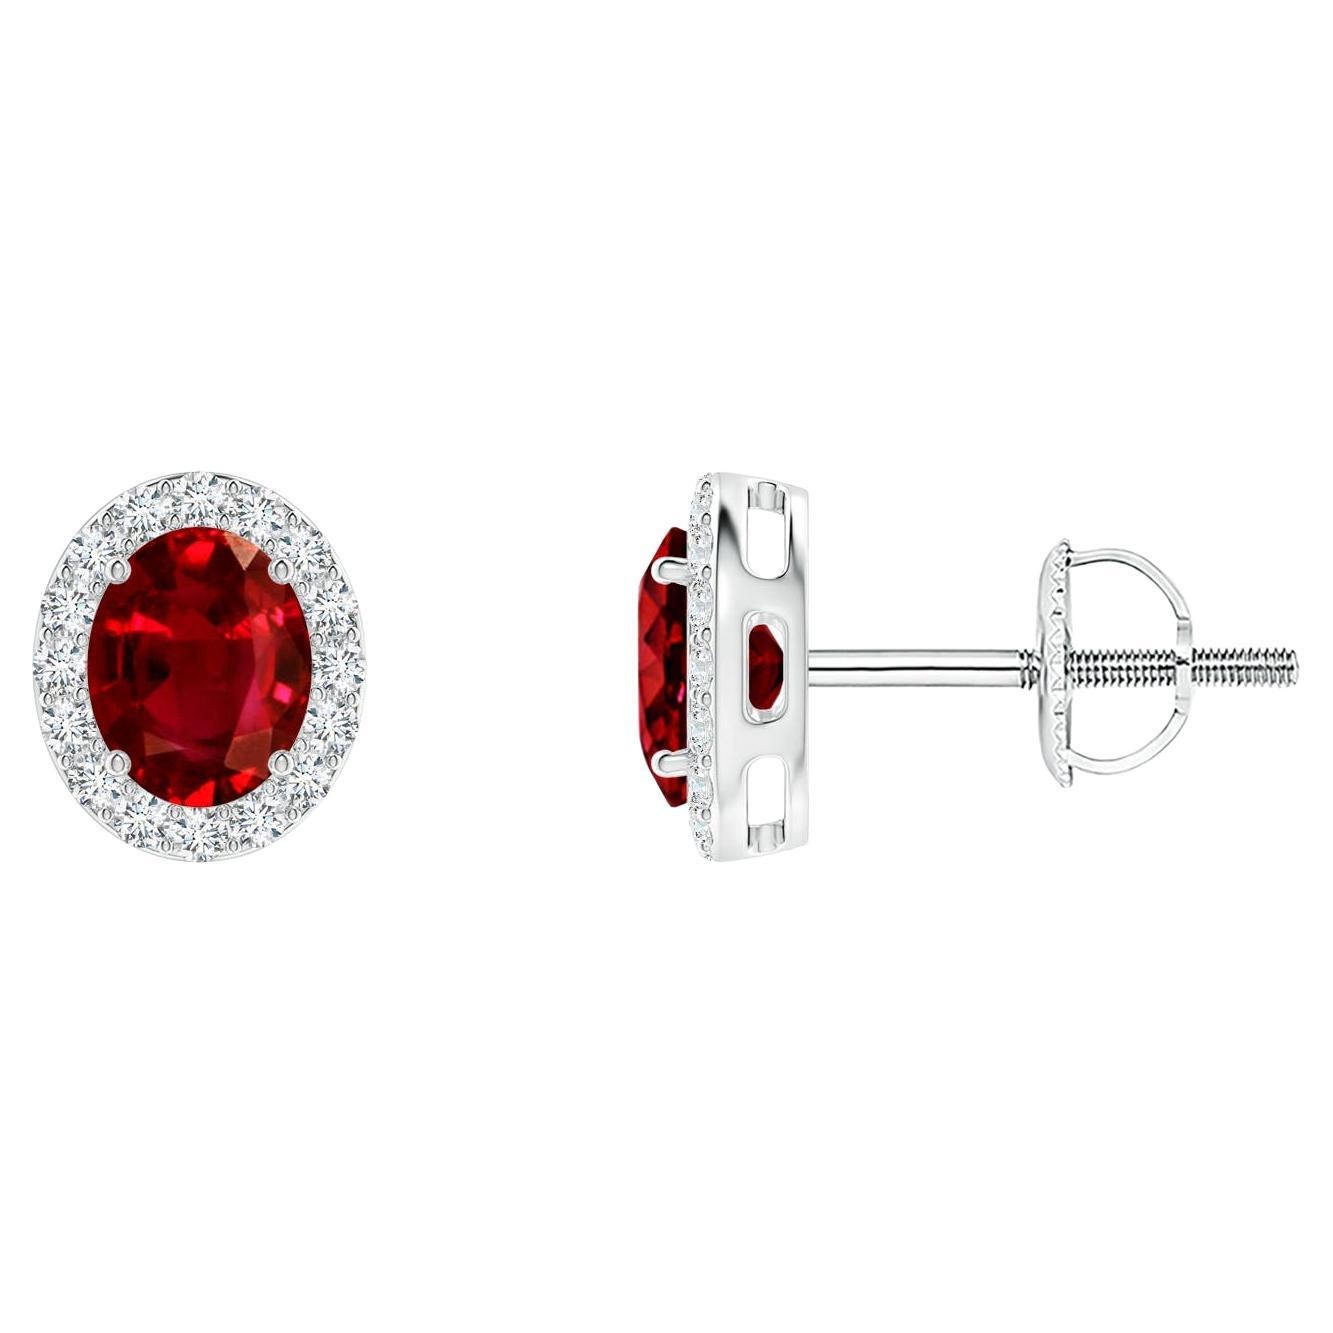 ANGARA Natural Oval 0.80ct Ruby Studs with Diamond Halo in 14K White Gold